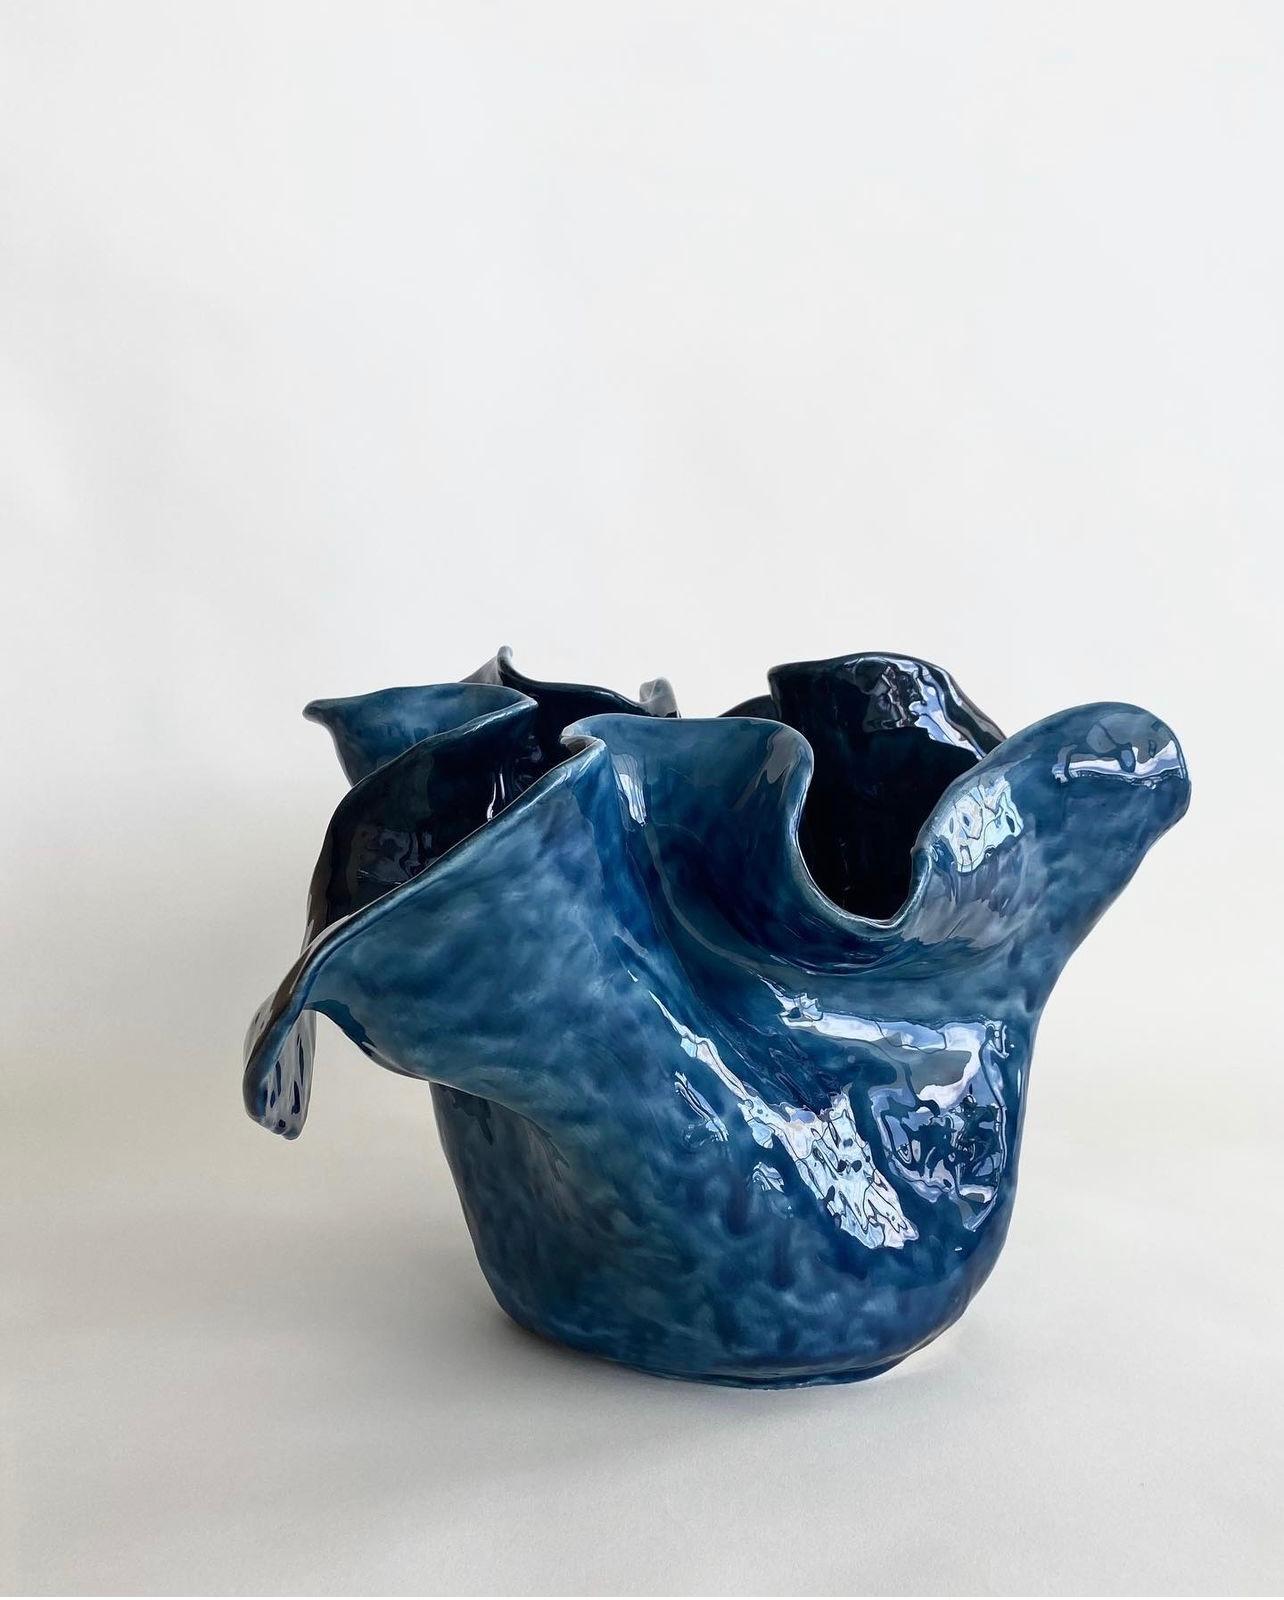 Visceral Blue II, 2022 by Magda von Hanau
From the Visceral series
Clay and glass glaze
Dimensions: 10.5 in H x 16 in W x 12 in D
Weight 20lbs

The Visceral series delves into the intricate relationship between the mind and the body, specifically